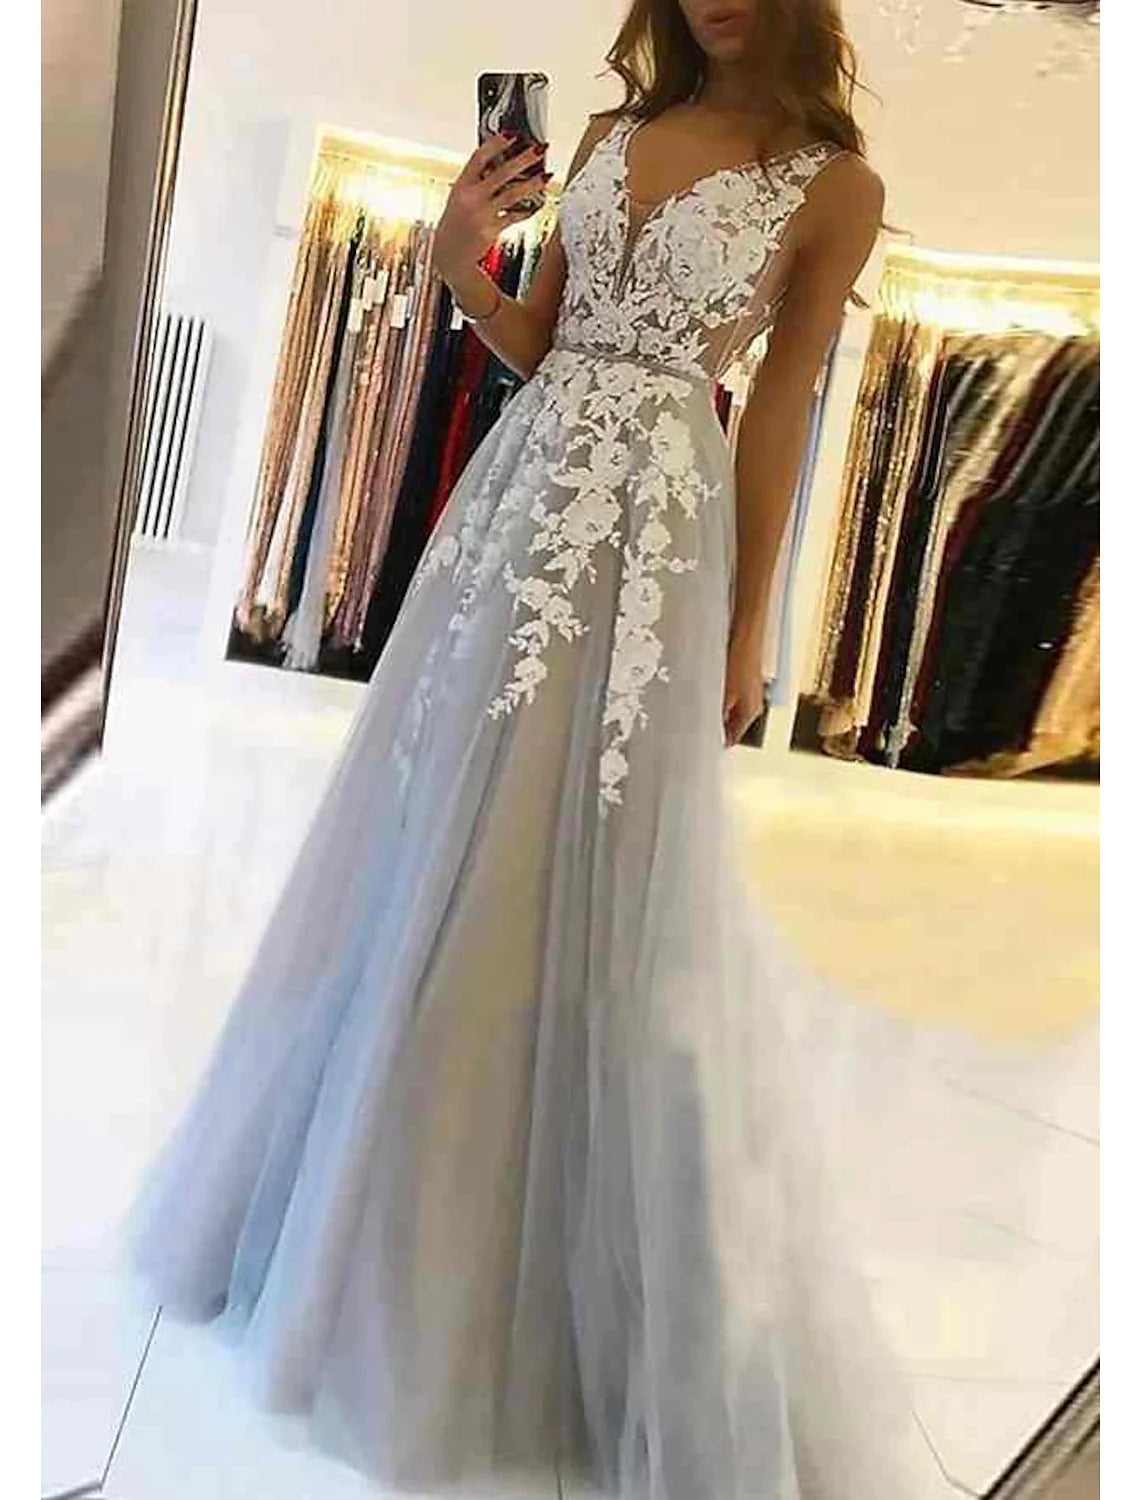 Ball Gown Evening Gown Floral Dress Prom Black Tie Court Train Sleeveless Off Shoulder Royal Style Cotton Backless with Beading Appliques